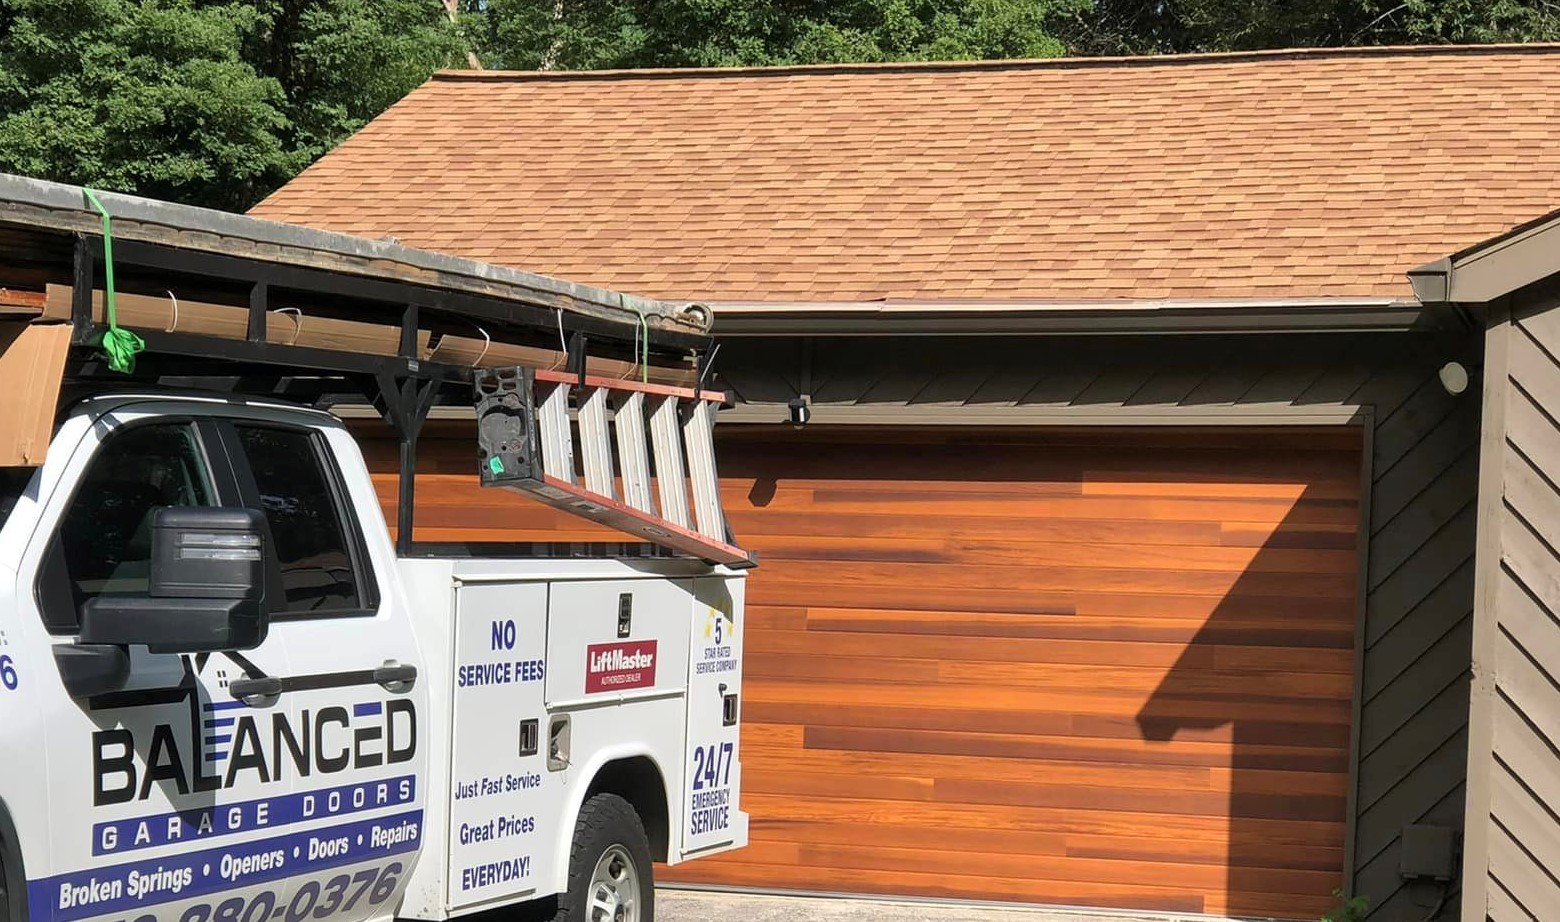 Balanced Garage Doors truck sitting outside home with newly installed garage door